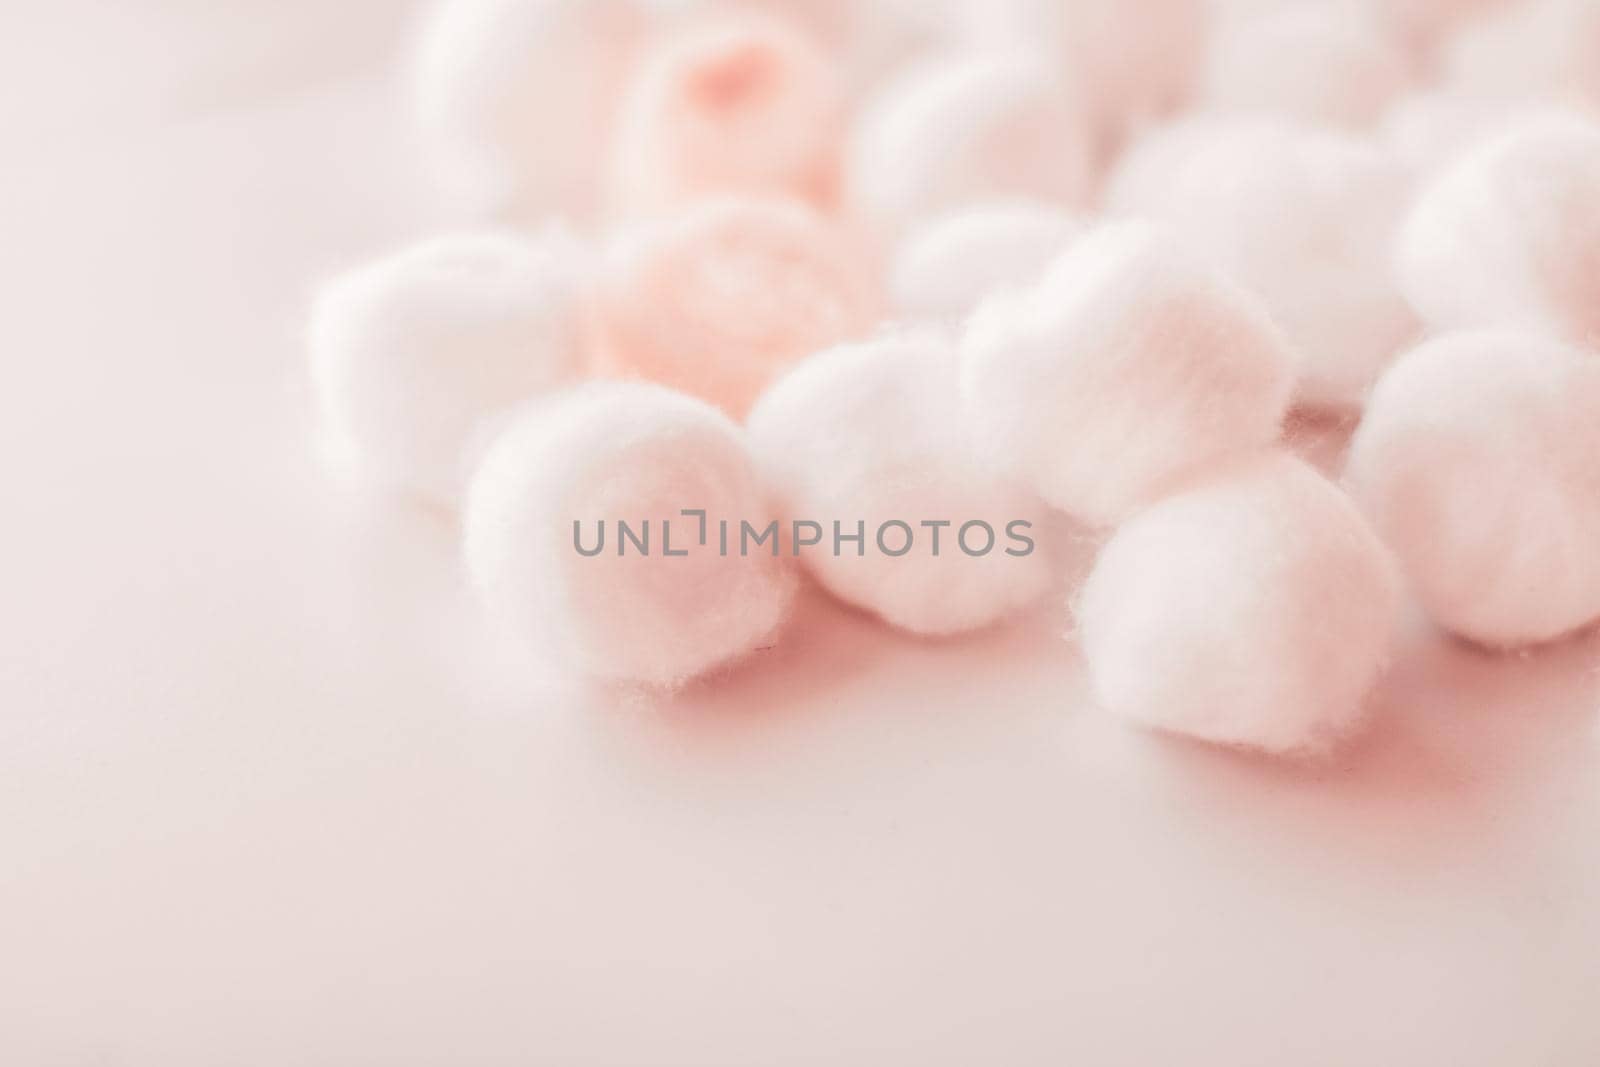 Organic cotton balls background for morning routine, spa cosmetics, hygiene and natural skincare beauty brand product as healthcare and medical design by Anneleven